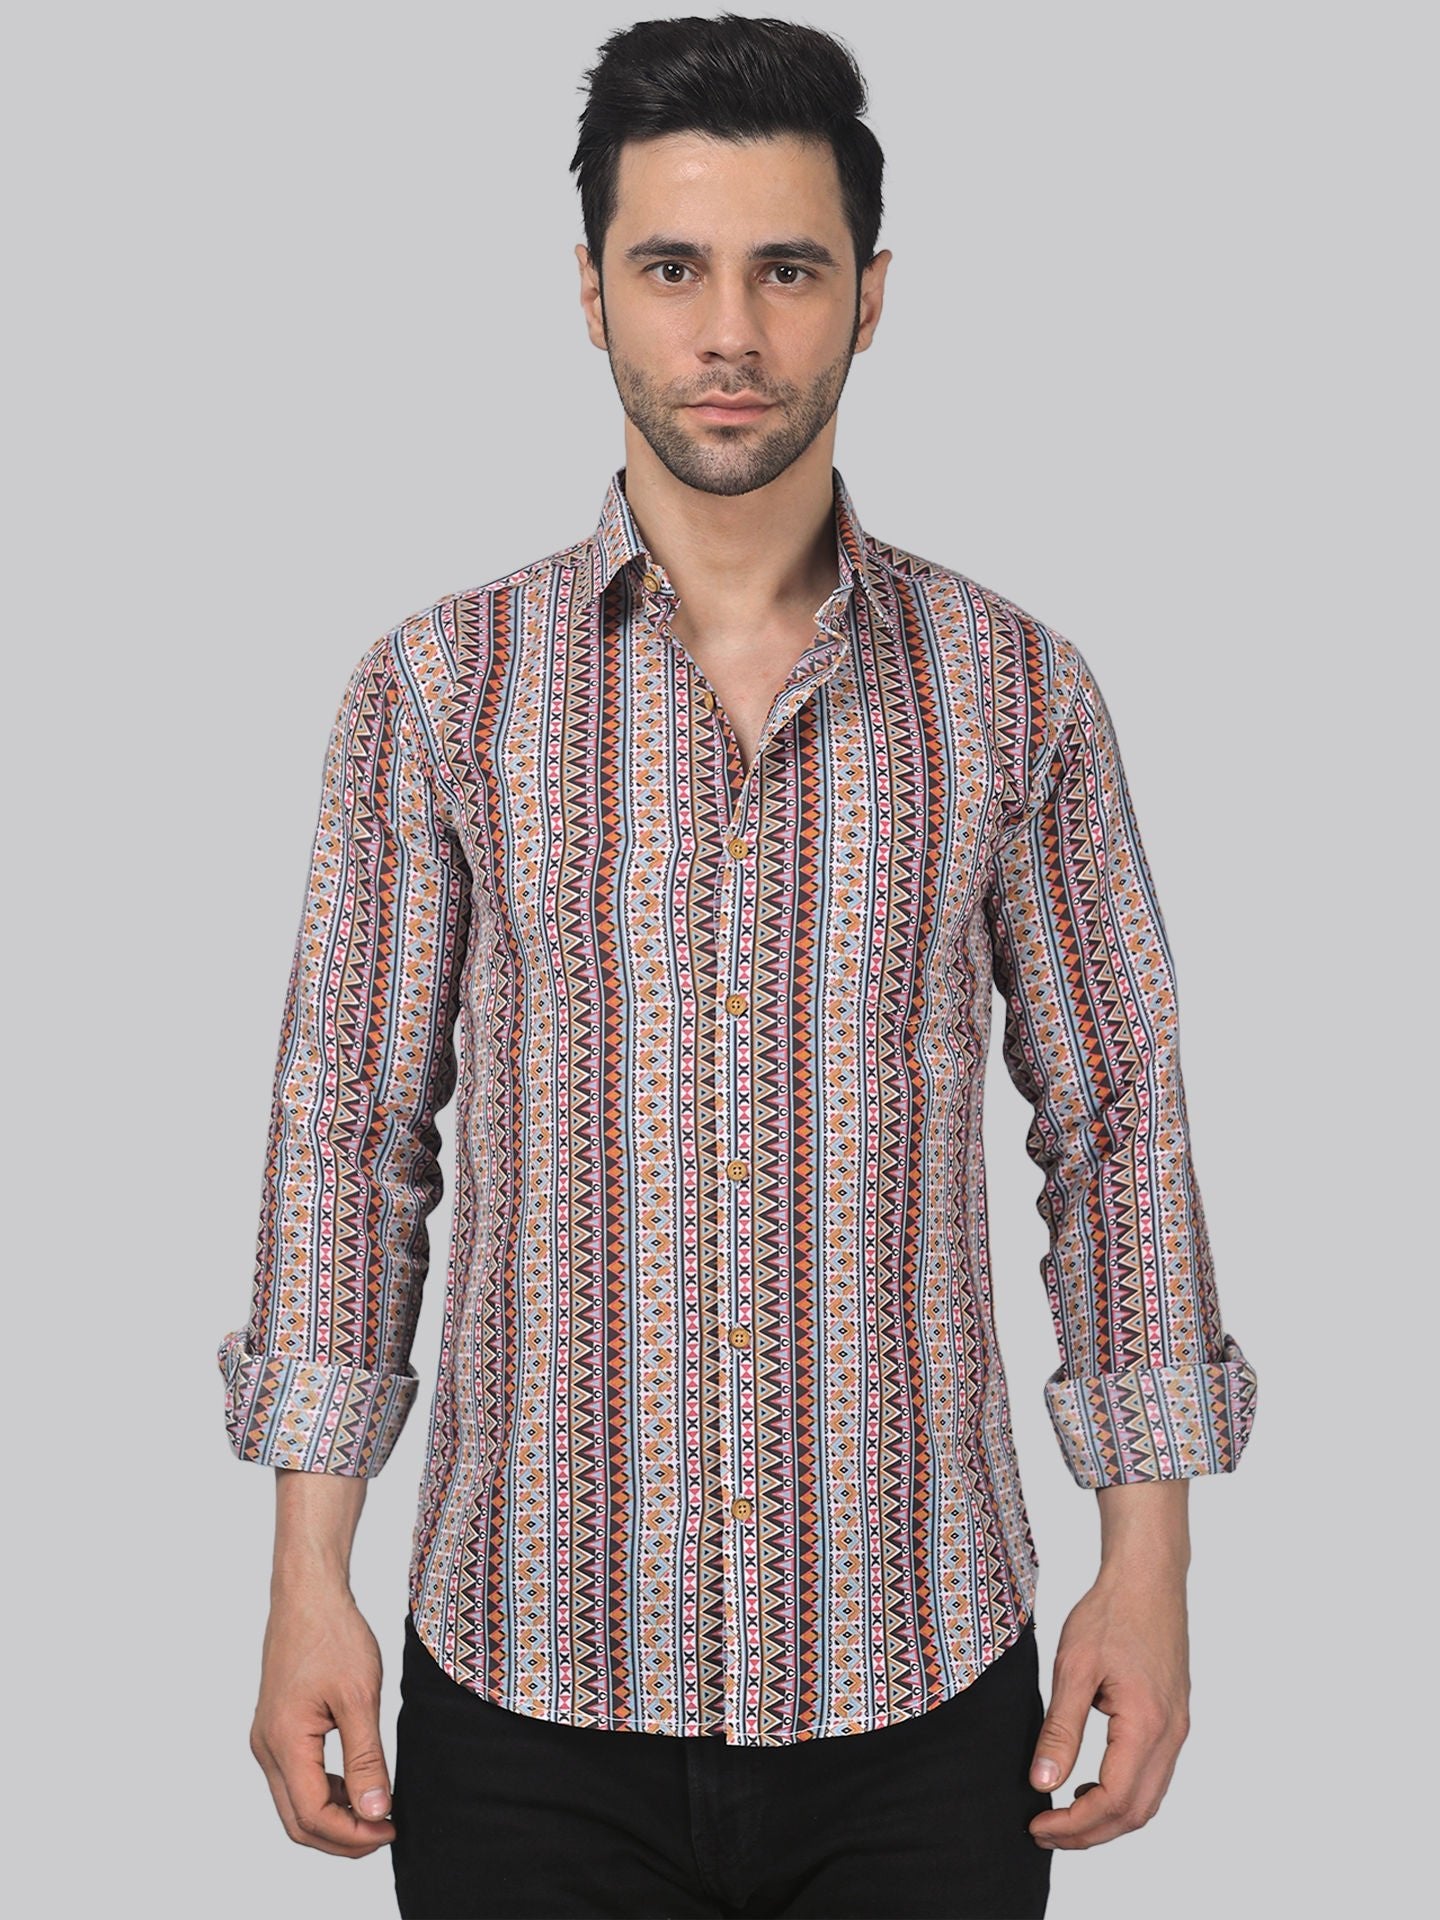 Nordic Men's Printed Full Sleeve Casual Linen Shirt - TryBuy® USA🇺🇸